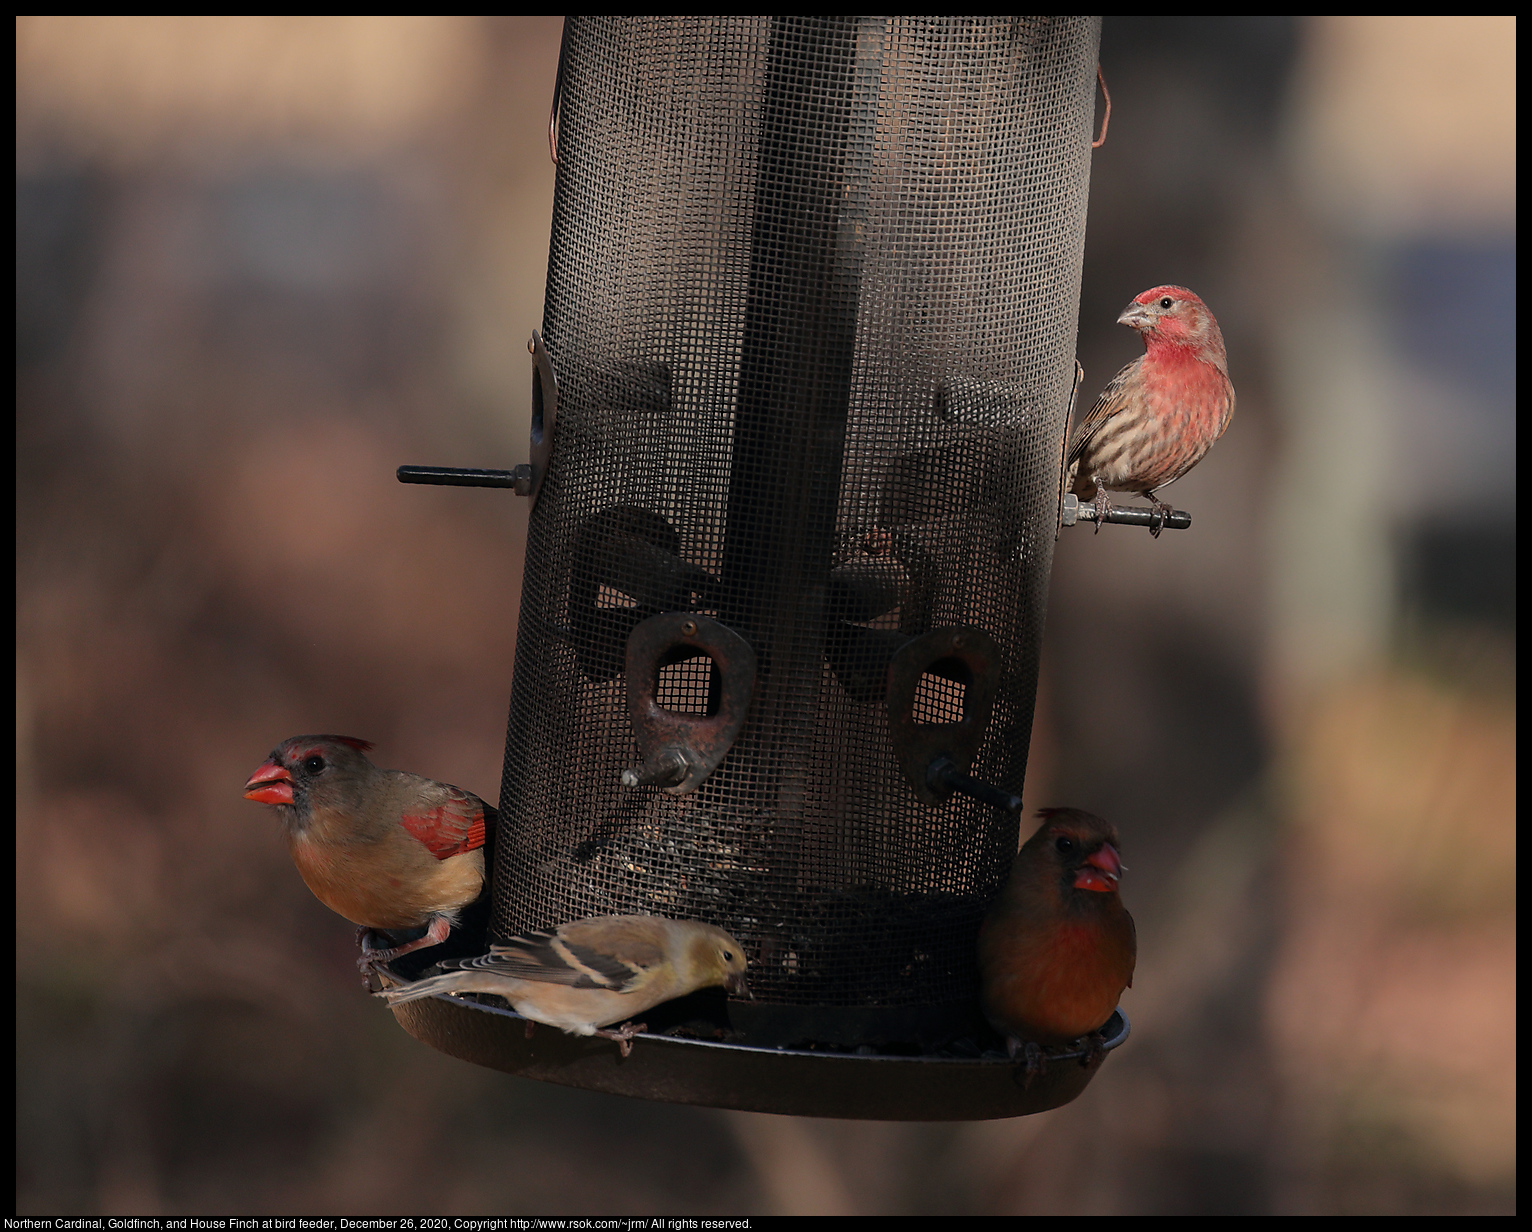 Northern Cardinal, Goldfinch, and House Finch at bird feeder, December 26, 2020